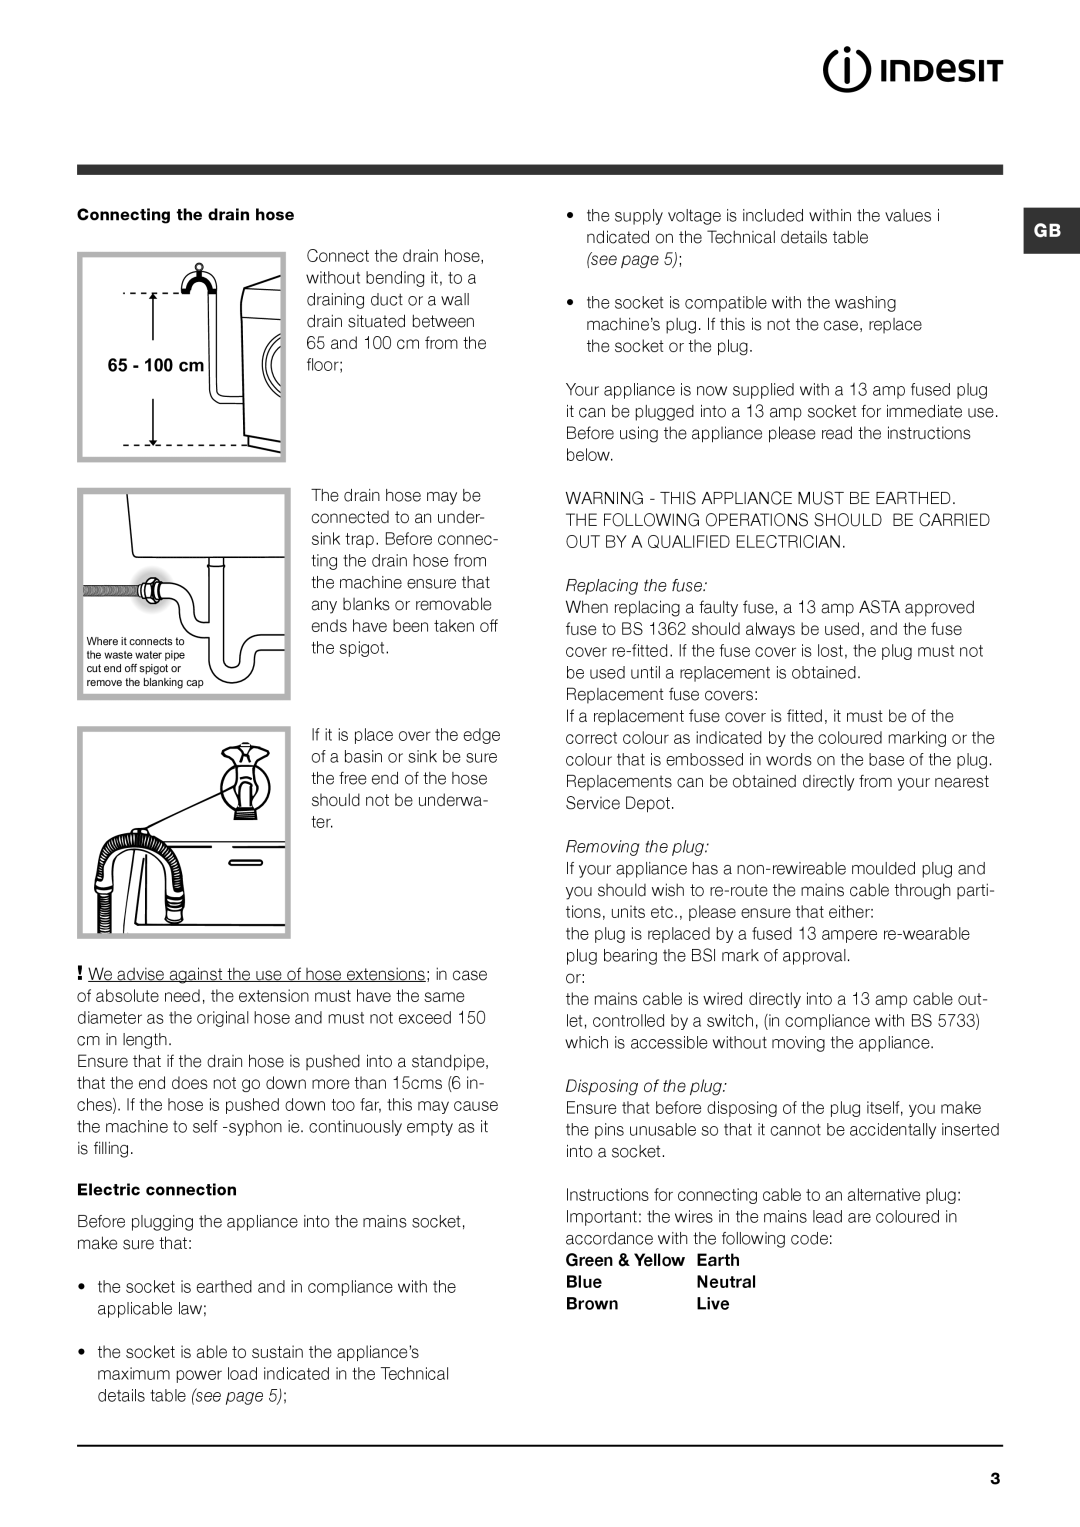 Indesit IWDD 7143 S instruction manual 65 - 100 cm, Replacing the fuse, Removing the plug, Disposing of the plug 